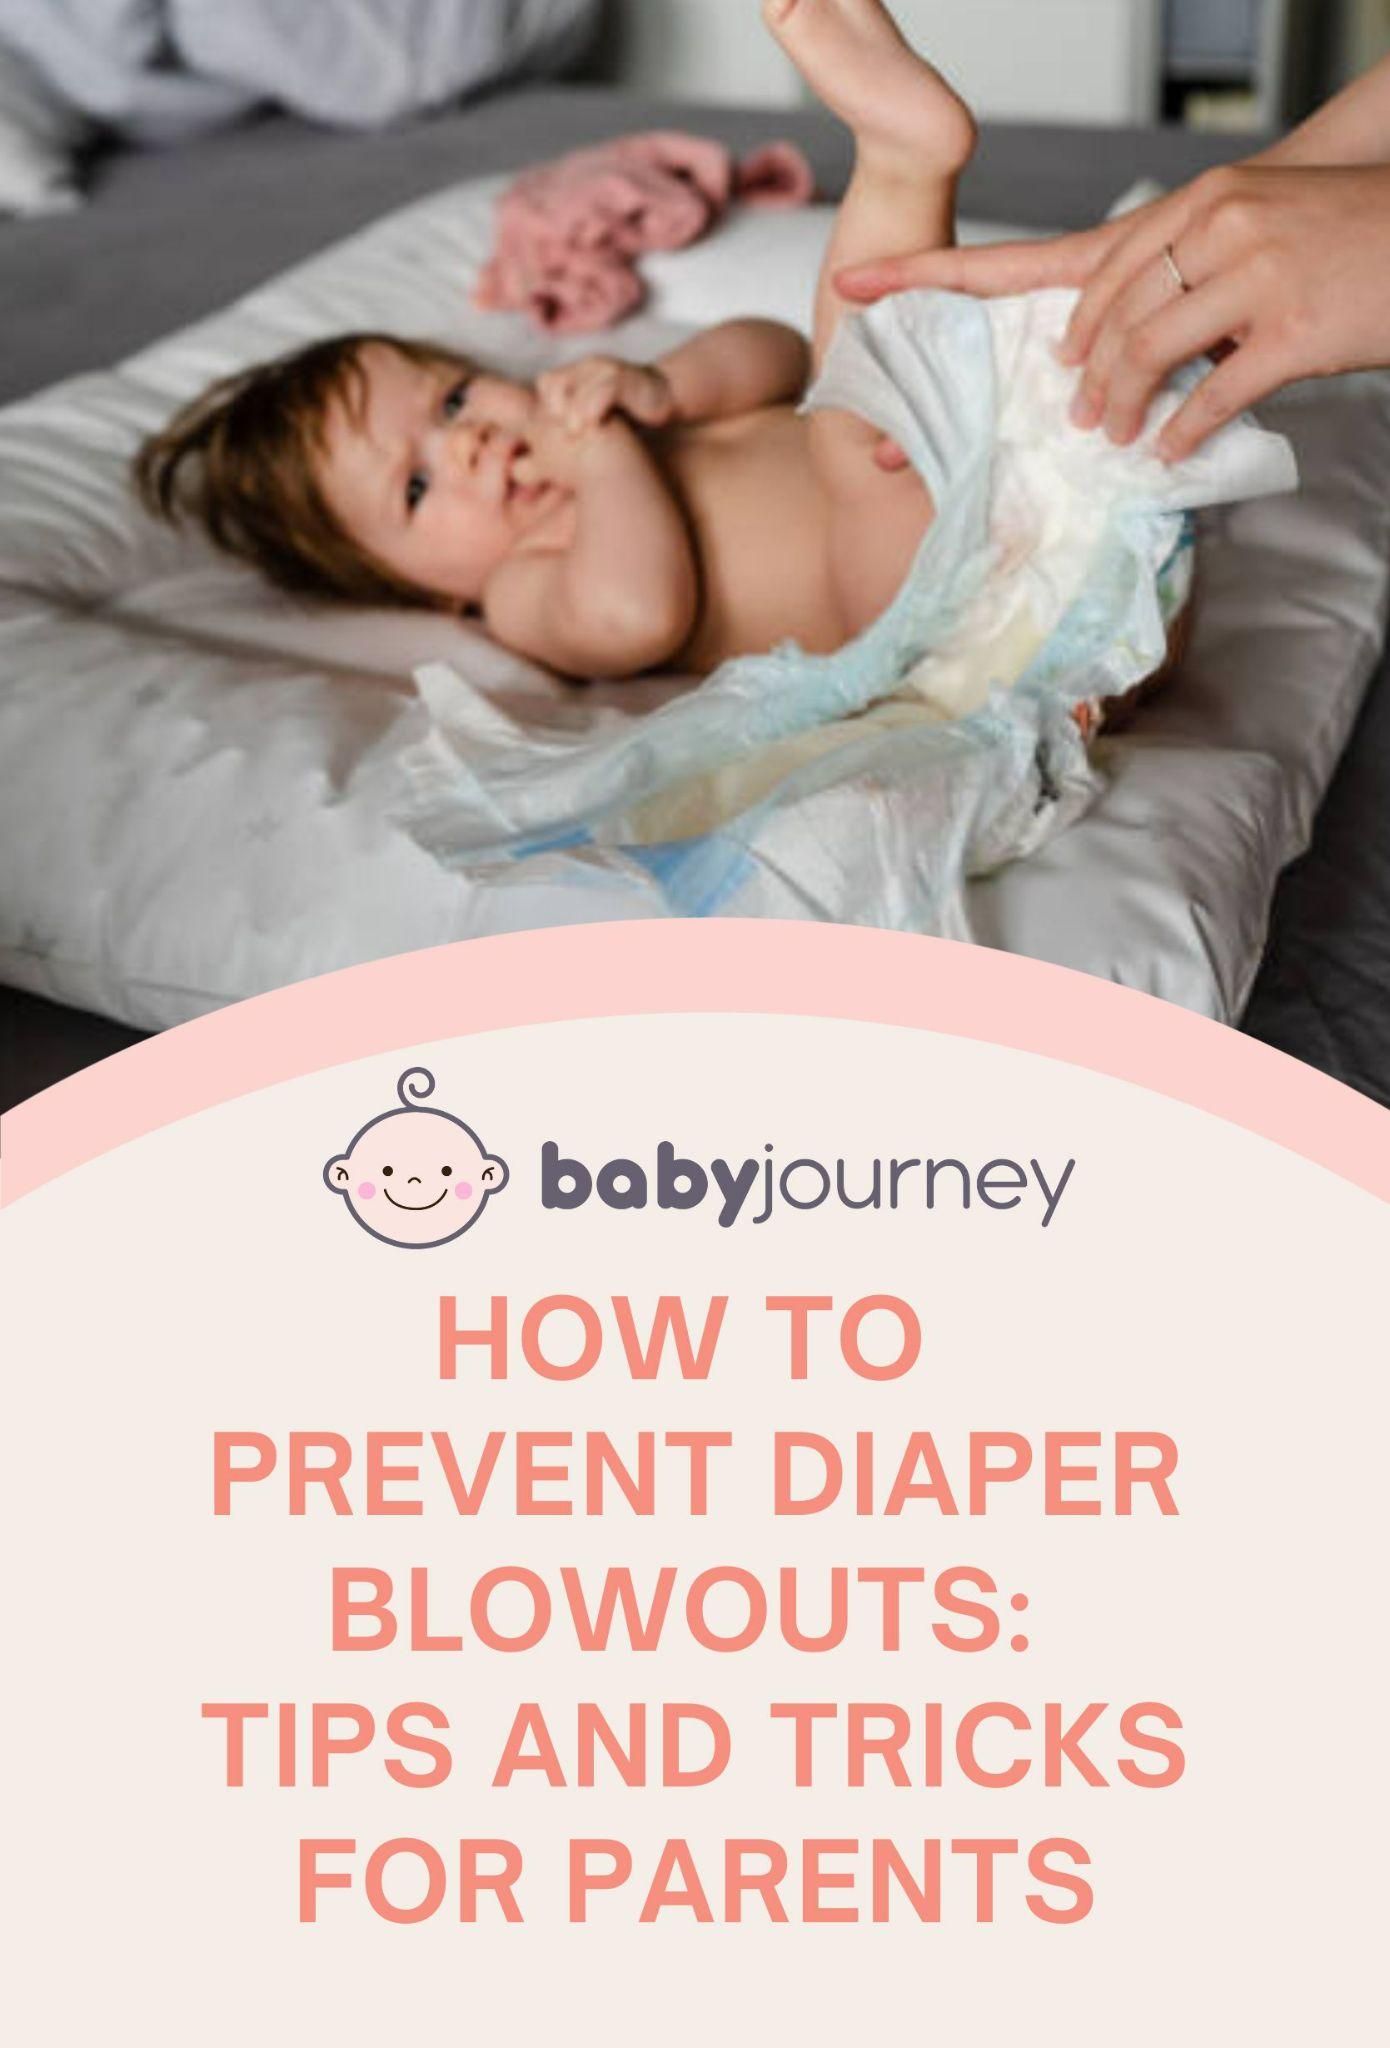 How to Prevent Diaper Blowouts: Tips and Tricks for Parents Pinterest Image - Baby Journey 